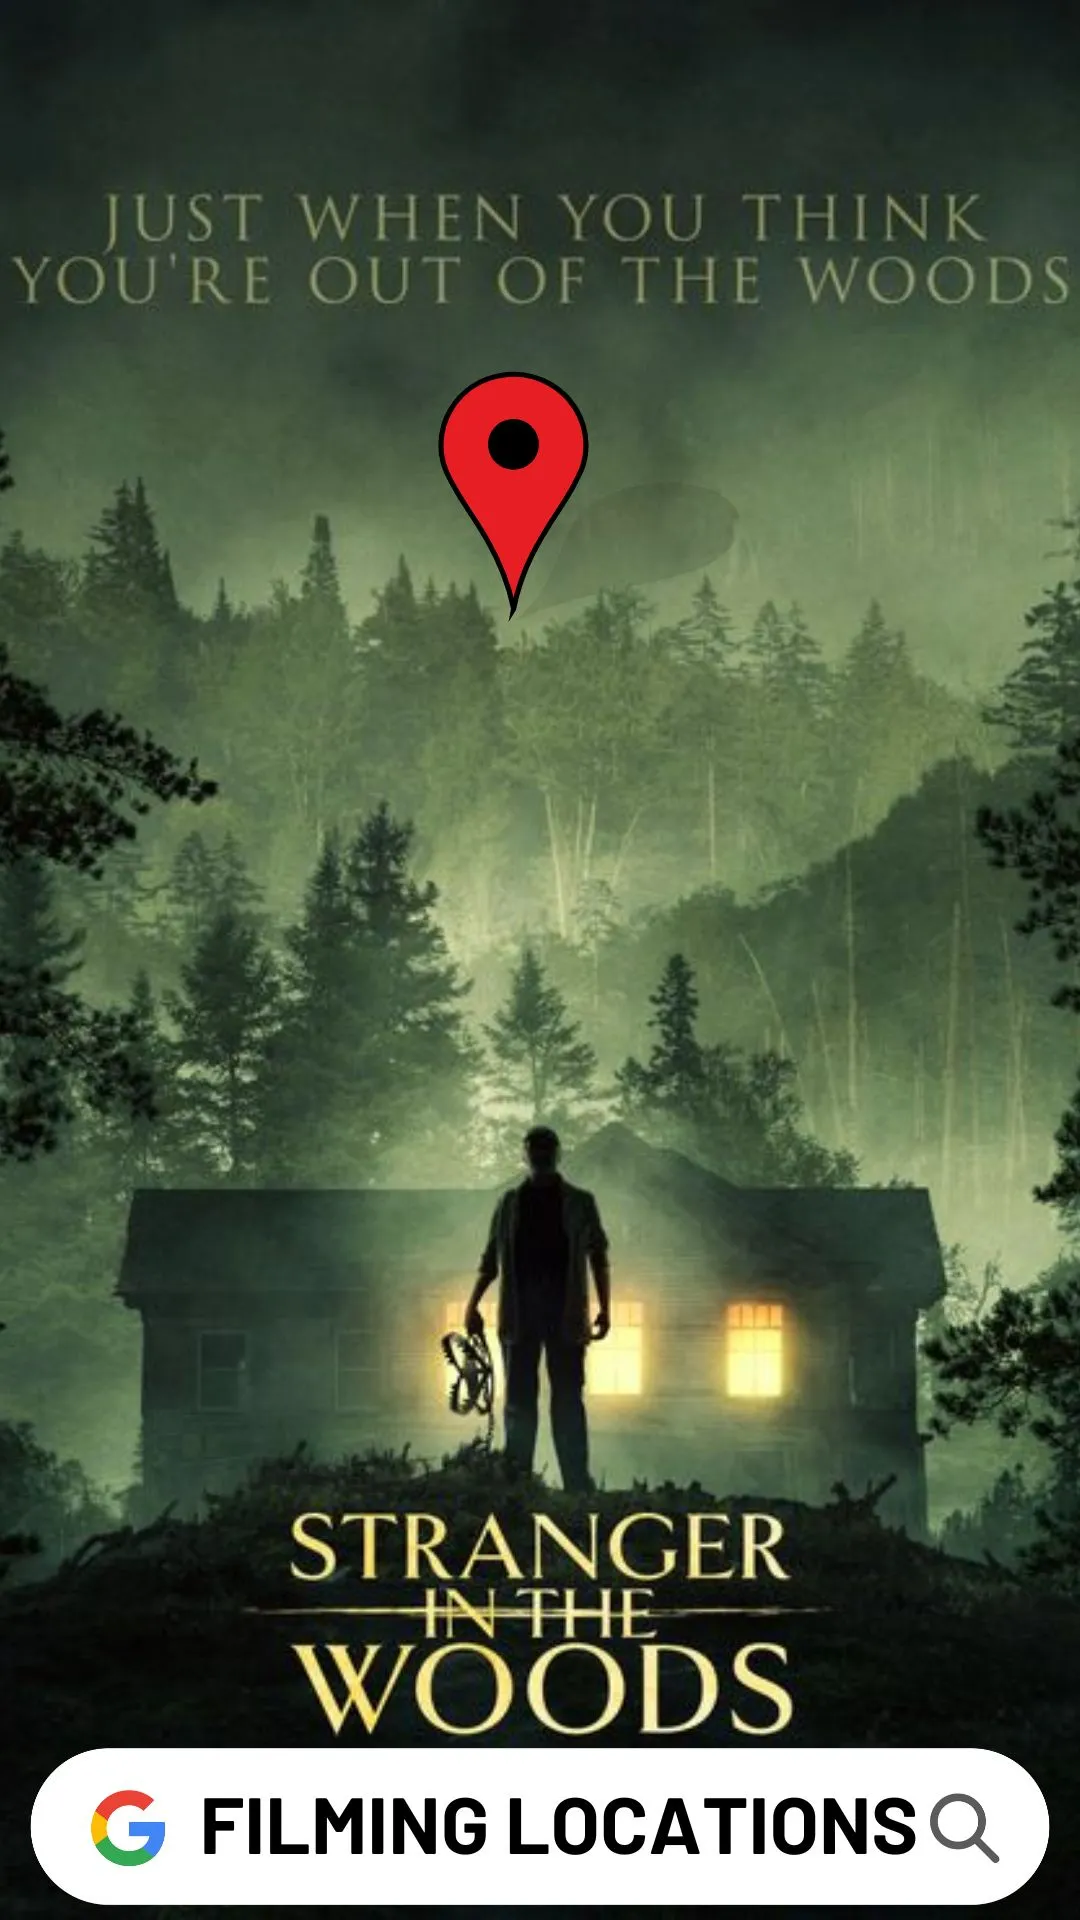 Stranger in the Woods Filming Locations